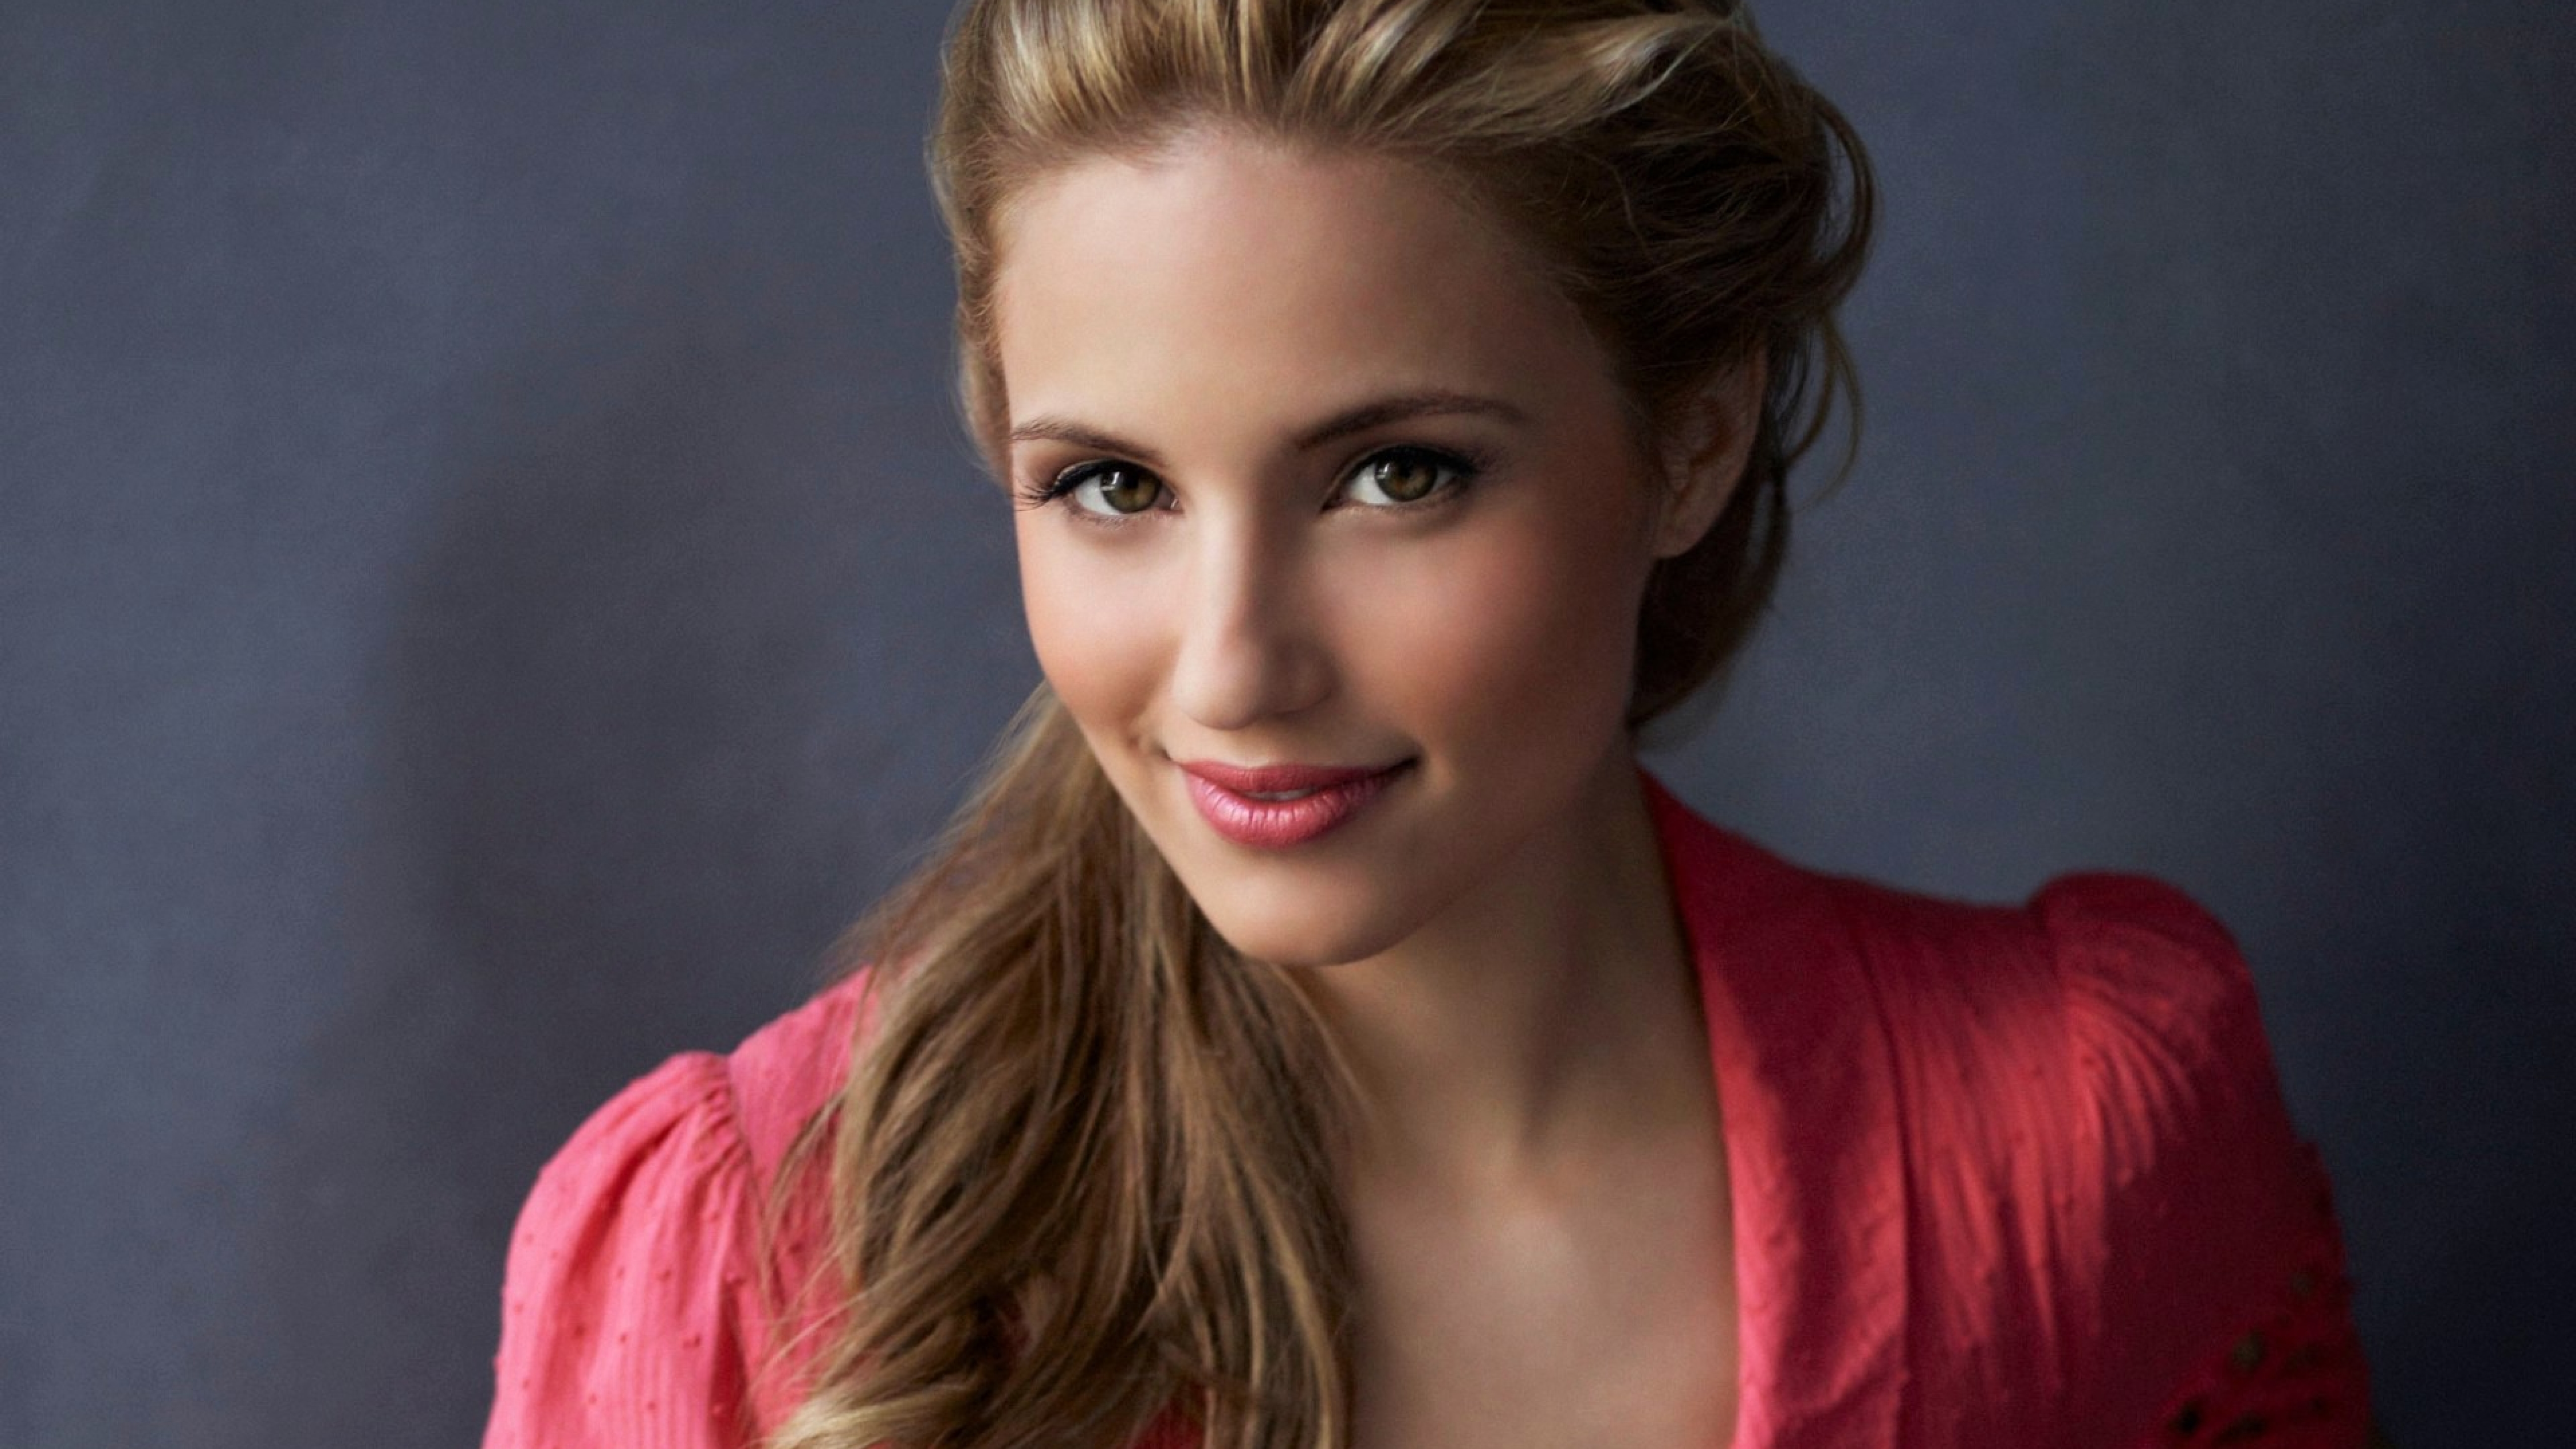 Dianna Agron Wallpapers. 